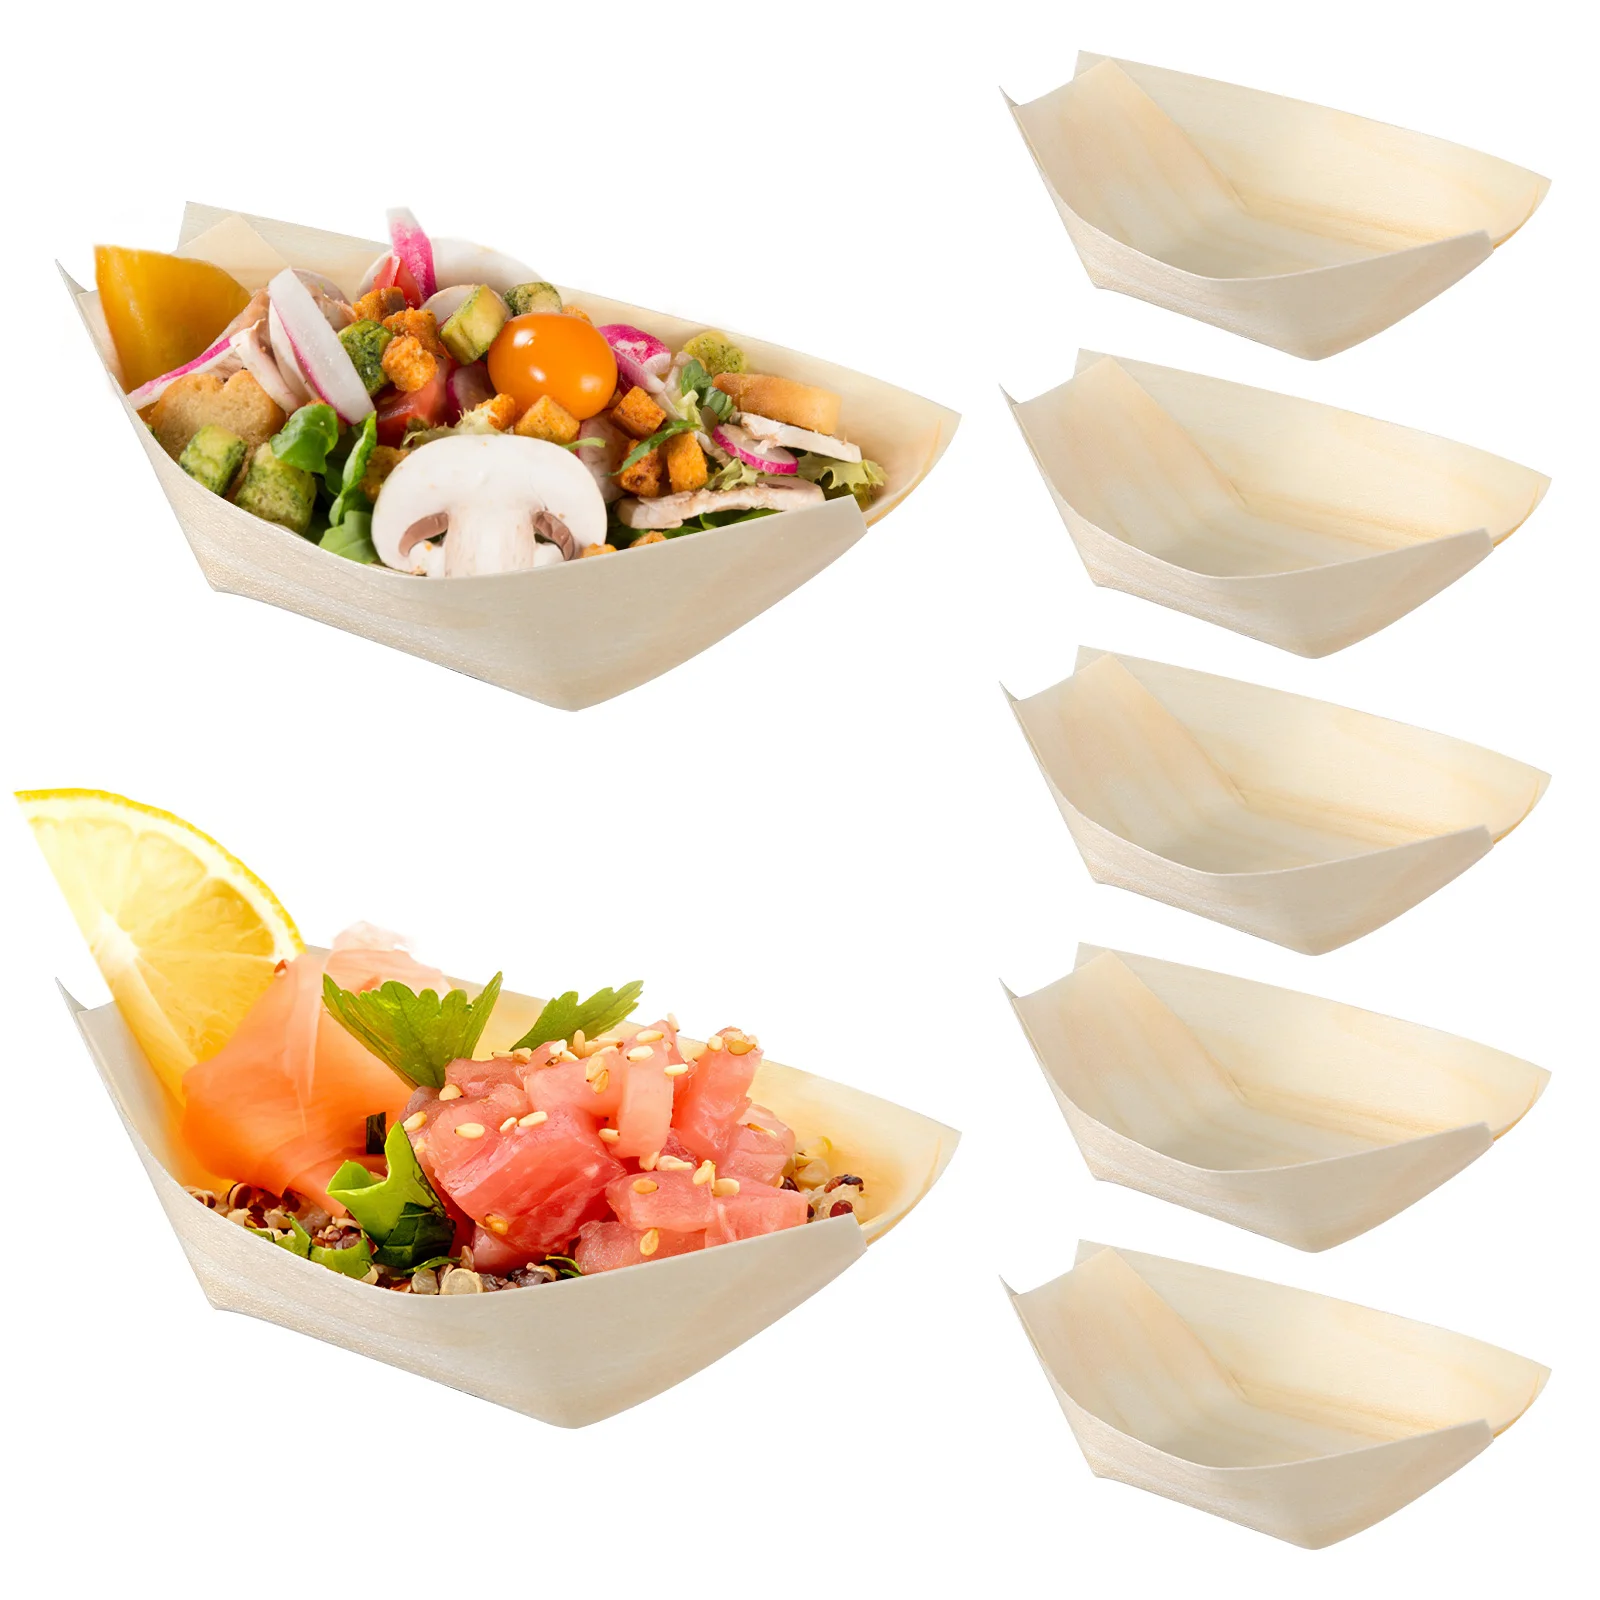 

100 Pcs Tableware Woodsy Decor Charcuterie Bowls Cutlery Set Take Out Food Serving Boats Baskets Trays Serving Plates Food Boats